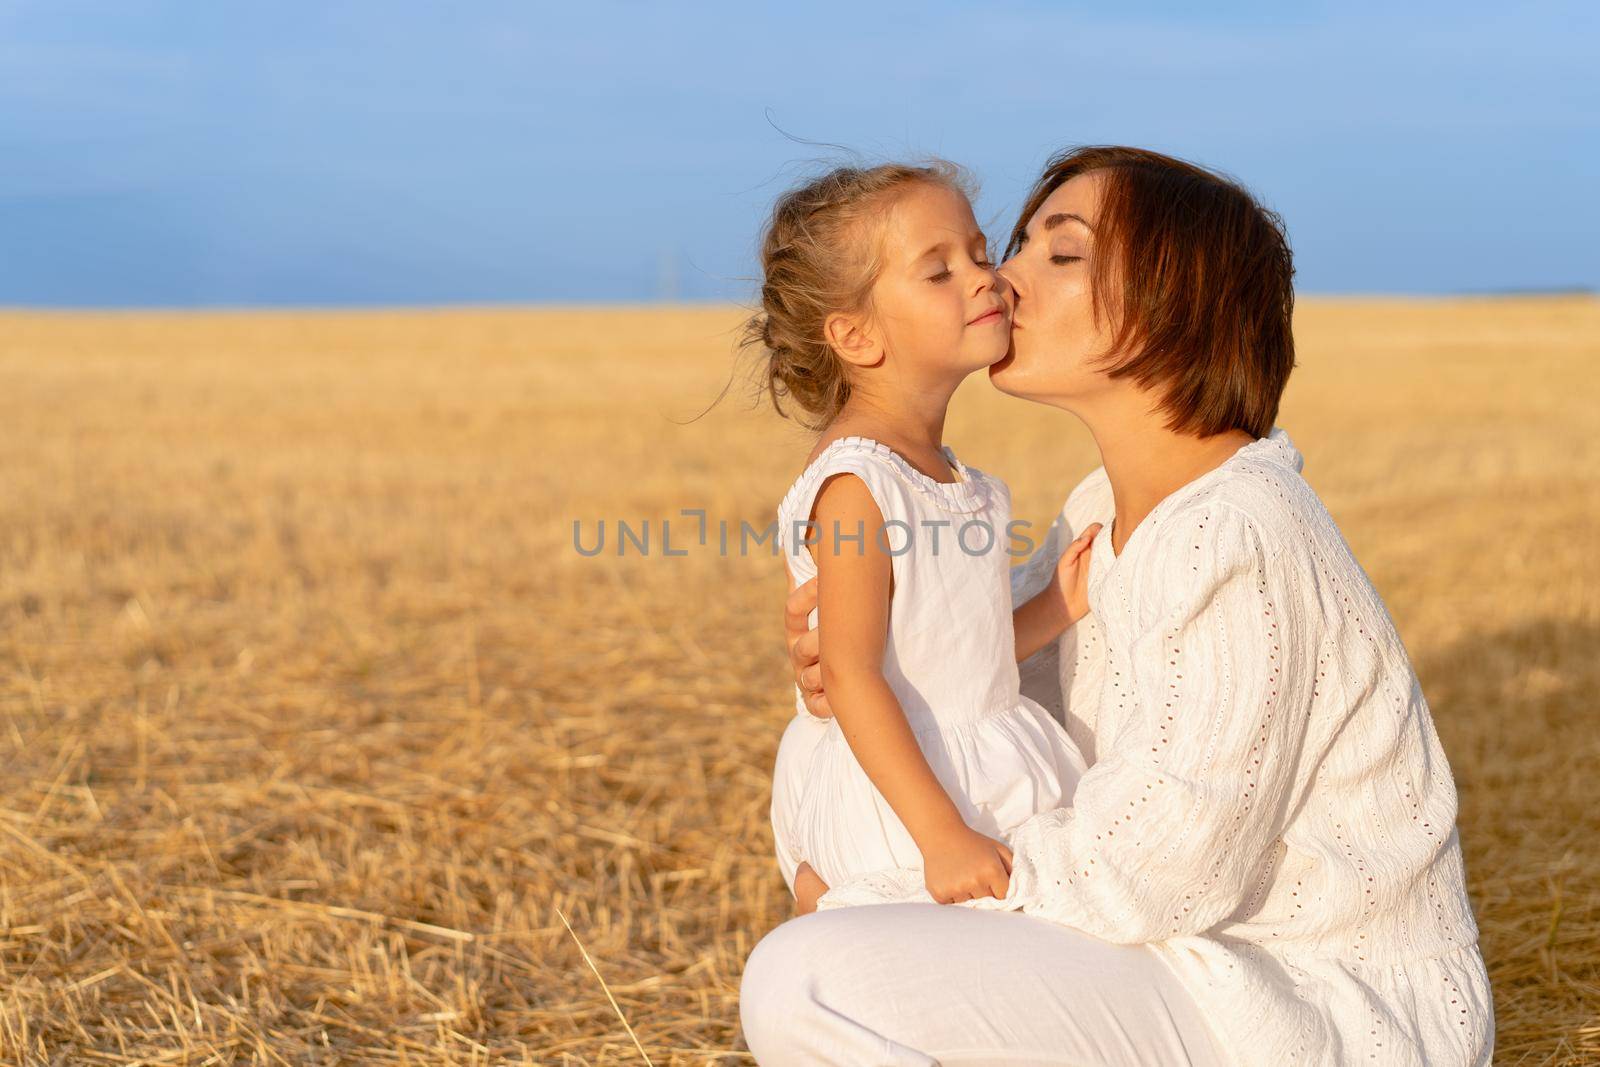 Mom kisses daughter cheek wheat field. Mother kiss little girl Happy family relationship outdoor. Dressed white. Caucasian female woman 35 years and girl 5 years old